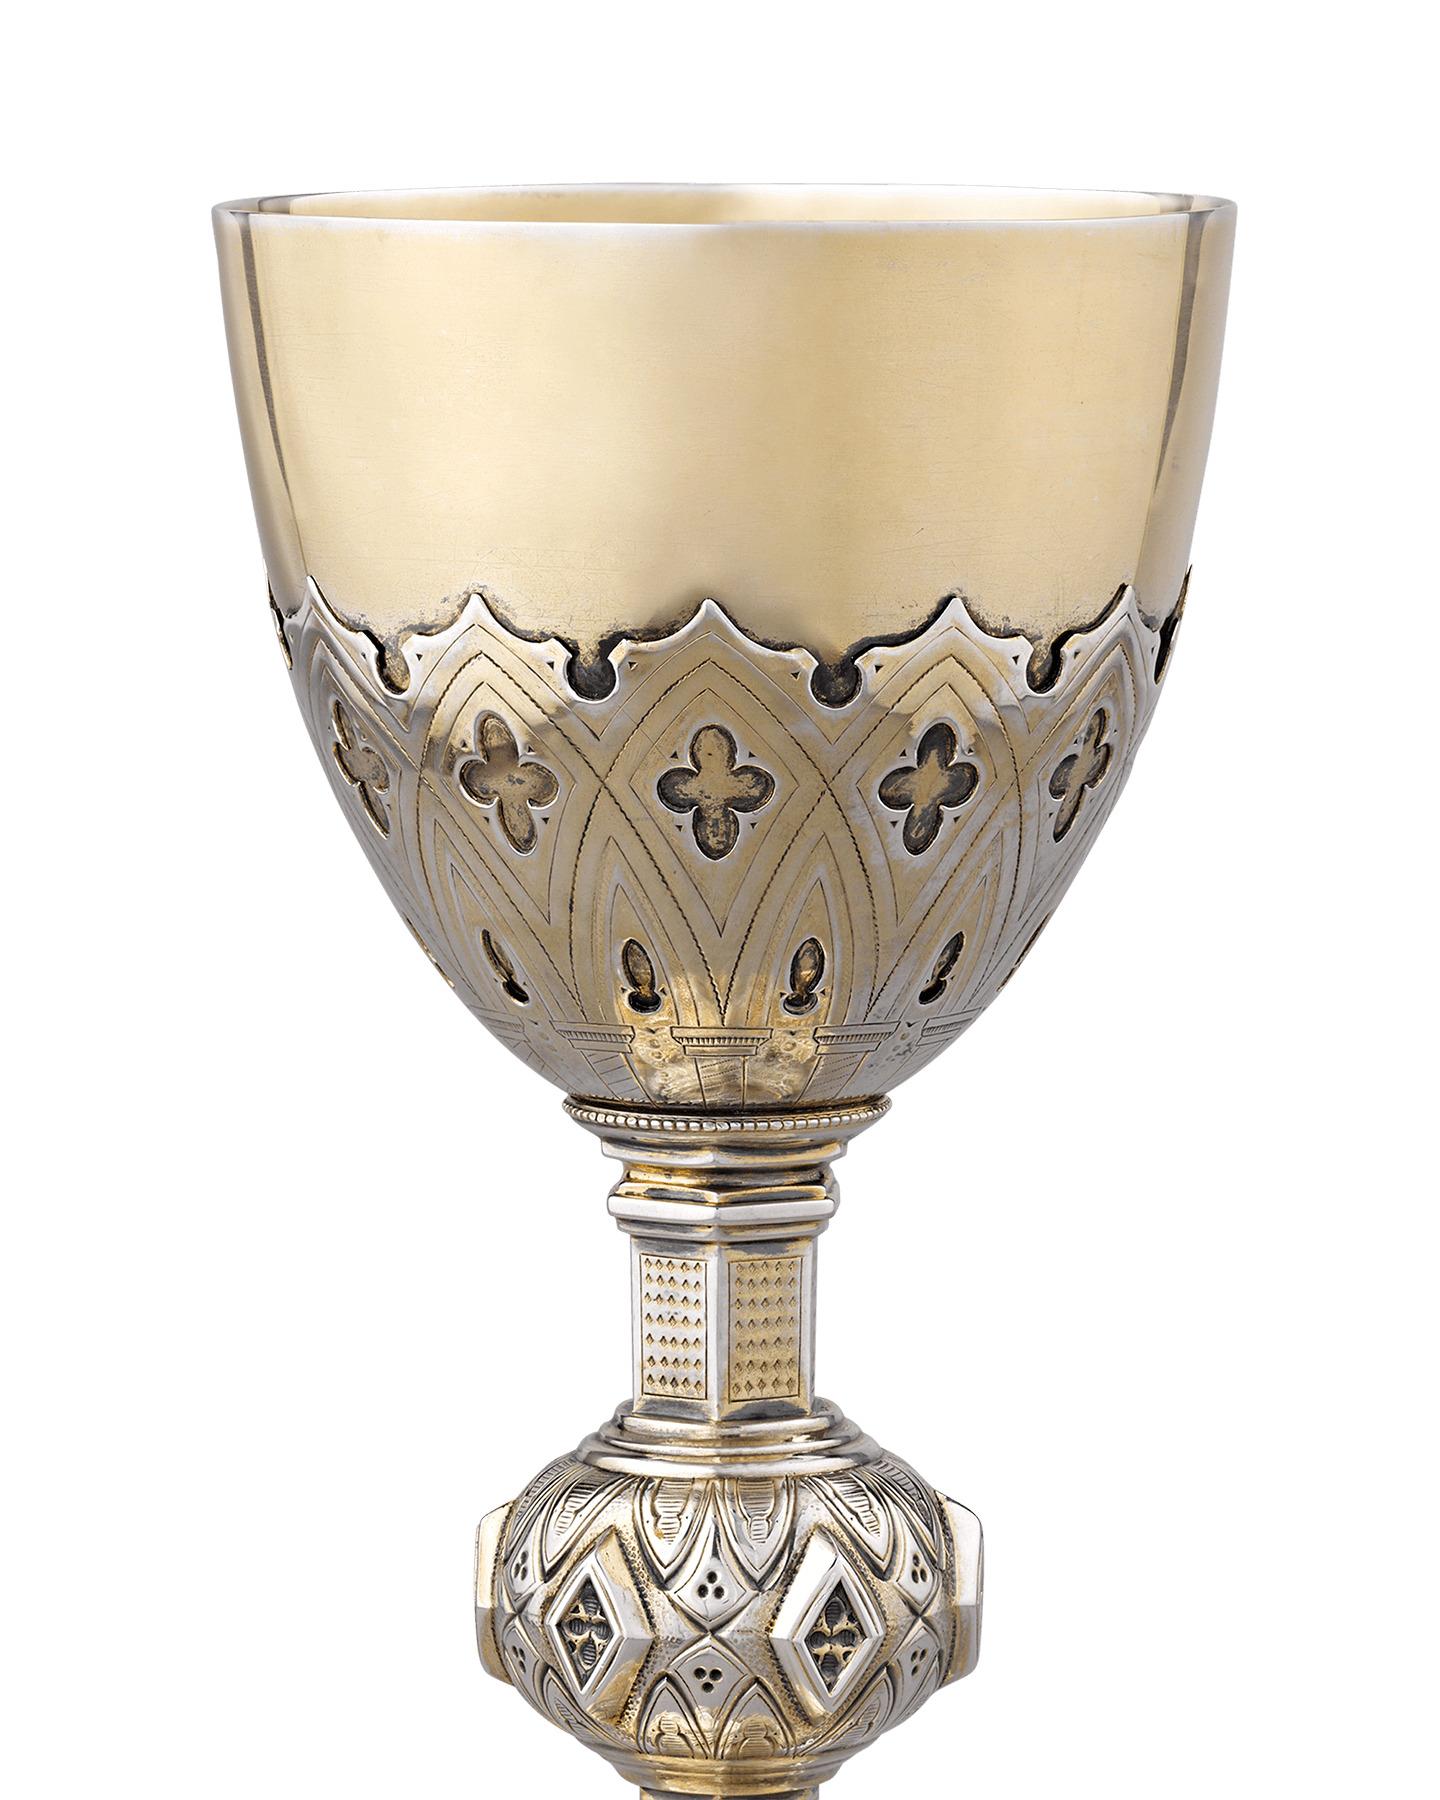 Perhaps the most beautiful examples of silver were those created for ecclesiastical purposes, and this silver gilt chalice is an extraordinary example of the art. Beautifully conceived, the chalice features a Gothic-style motif featuring crosses,